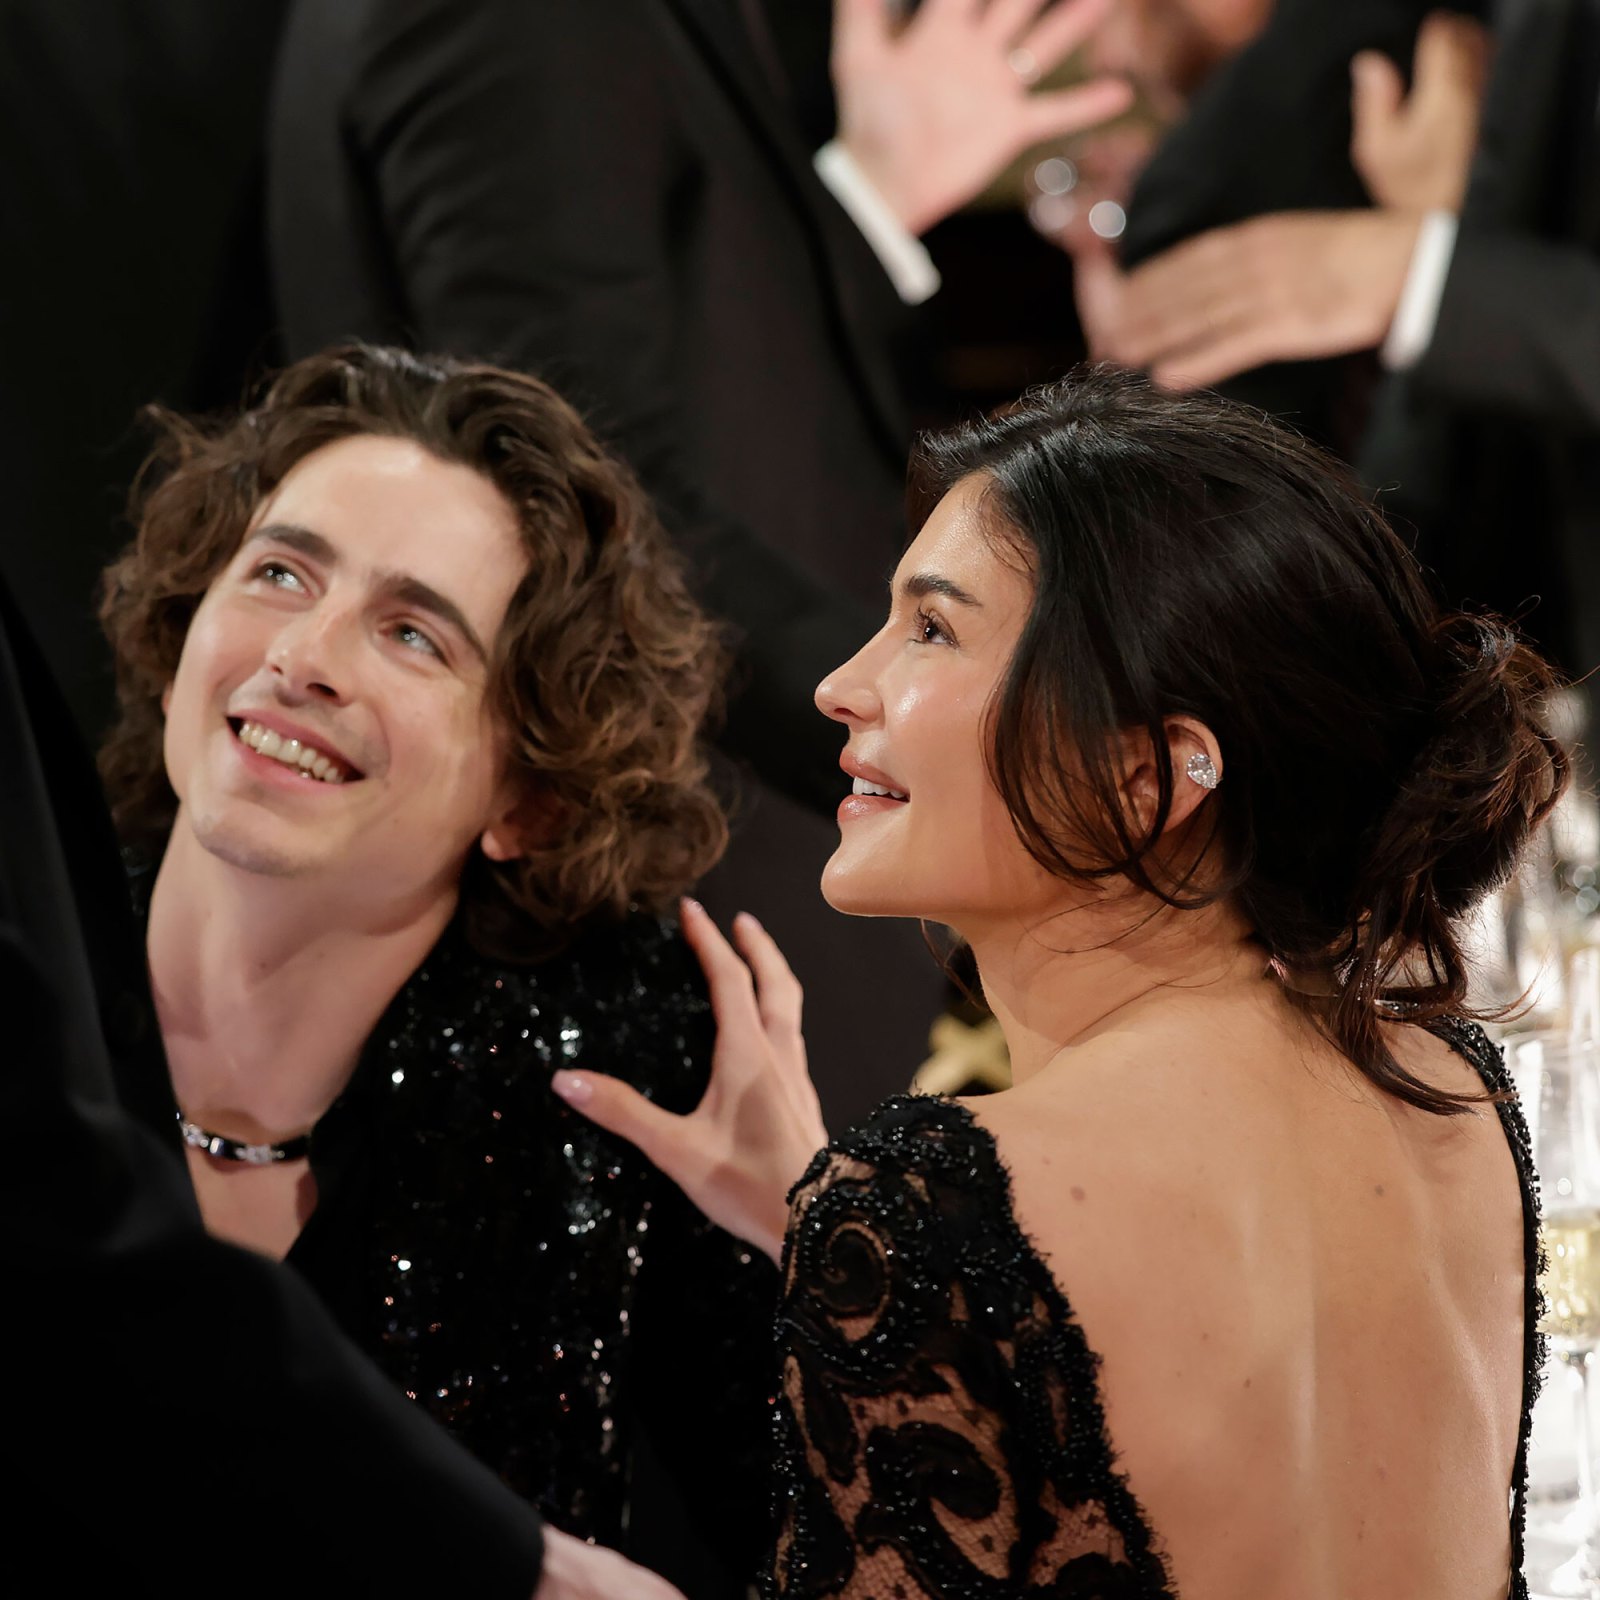 Kylie Jenner, Timothee Chalamet Kiss During Golden Globes Appearance